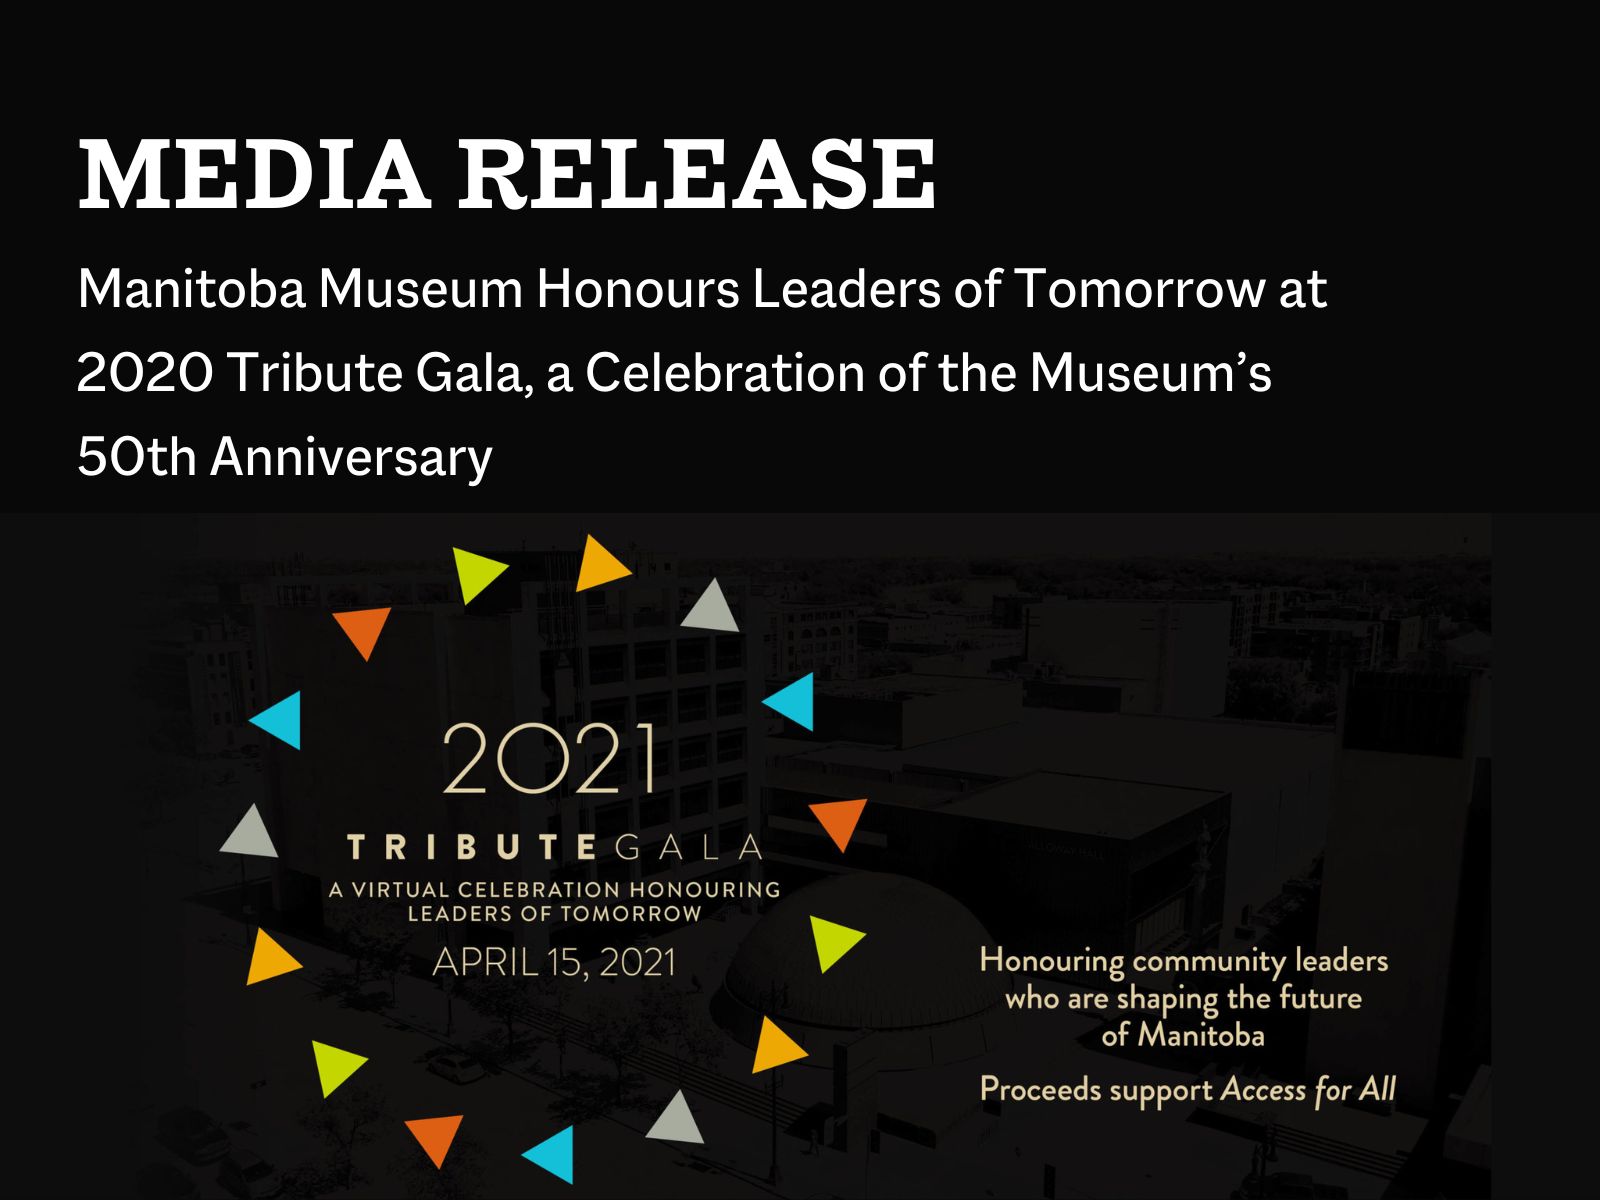 Manitoba Museum Honours Leaders of Tomorrow at 2020 Tribute Gala, a Celebration of the Museum’s 50th Anniversary